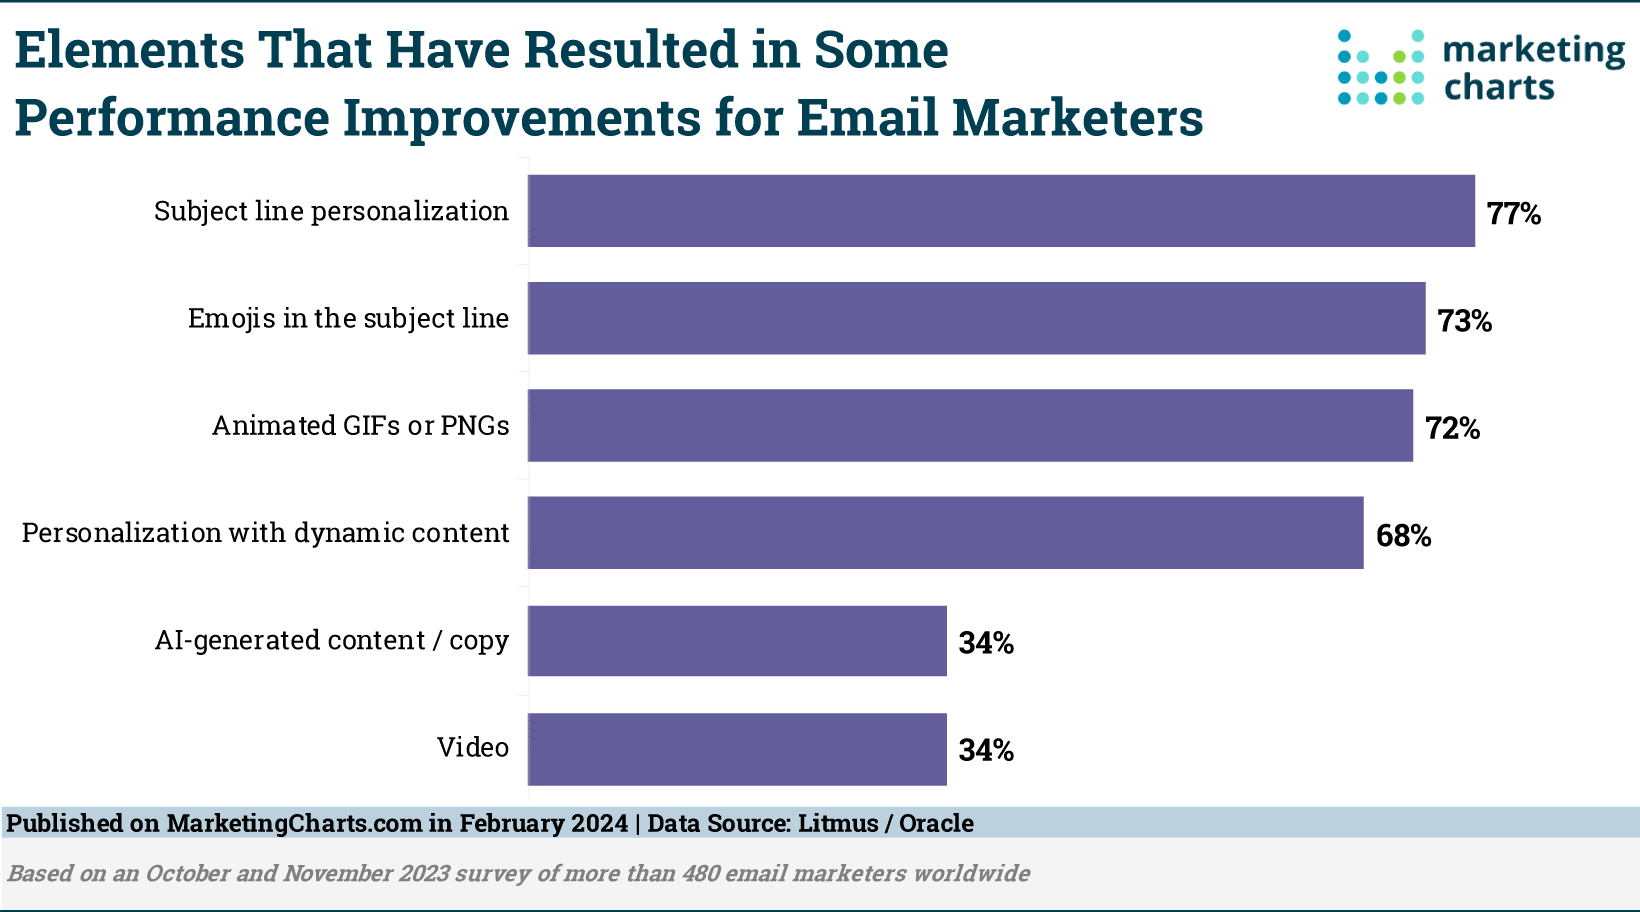 Subject Line Tweaks Can Boost Performance, Say Email Marketers